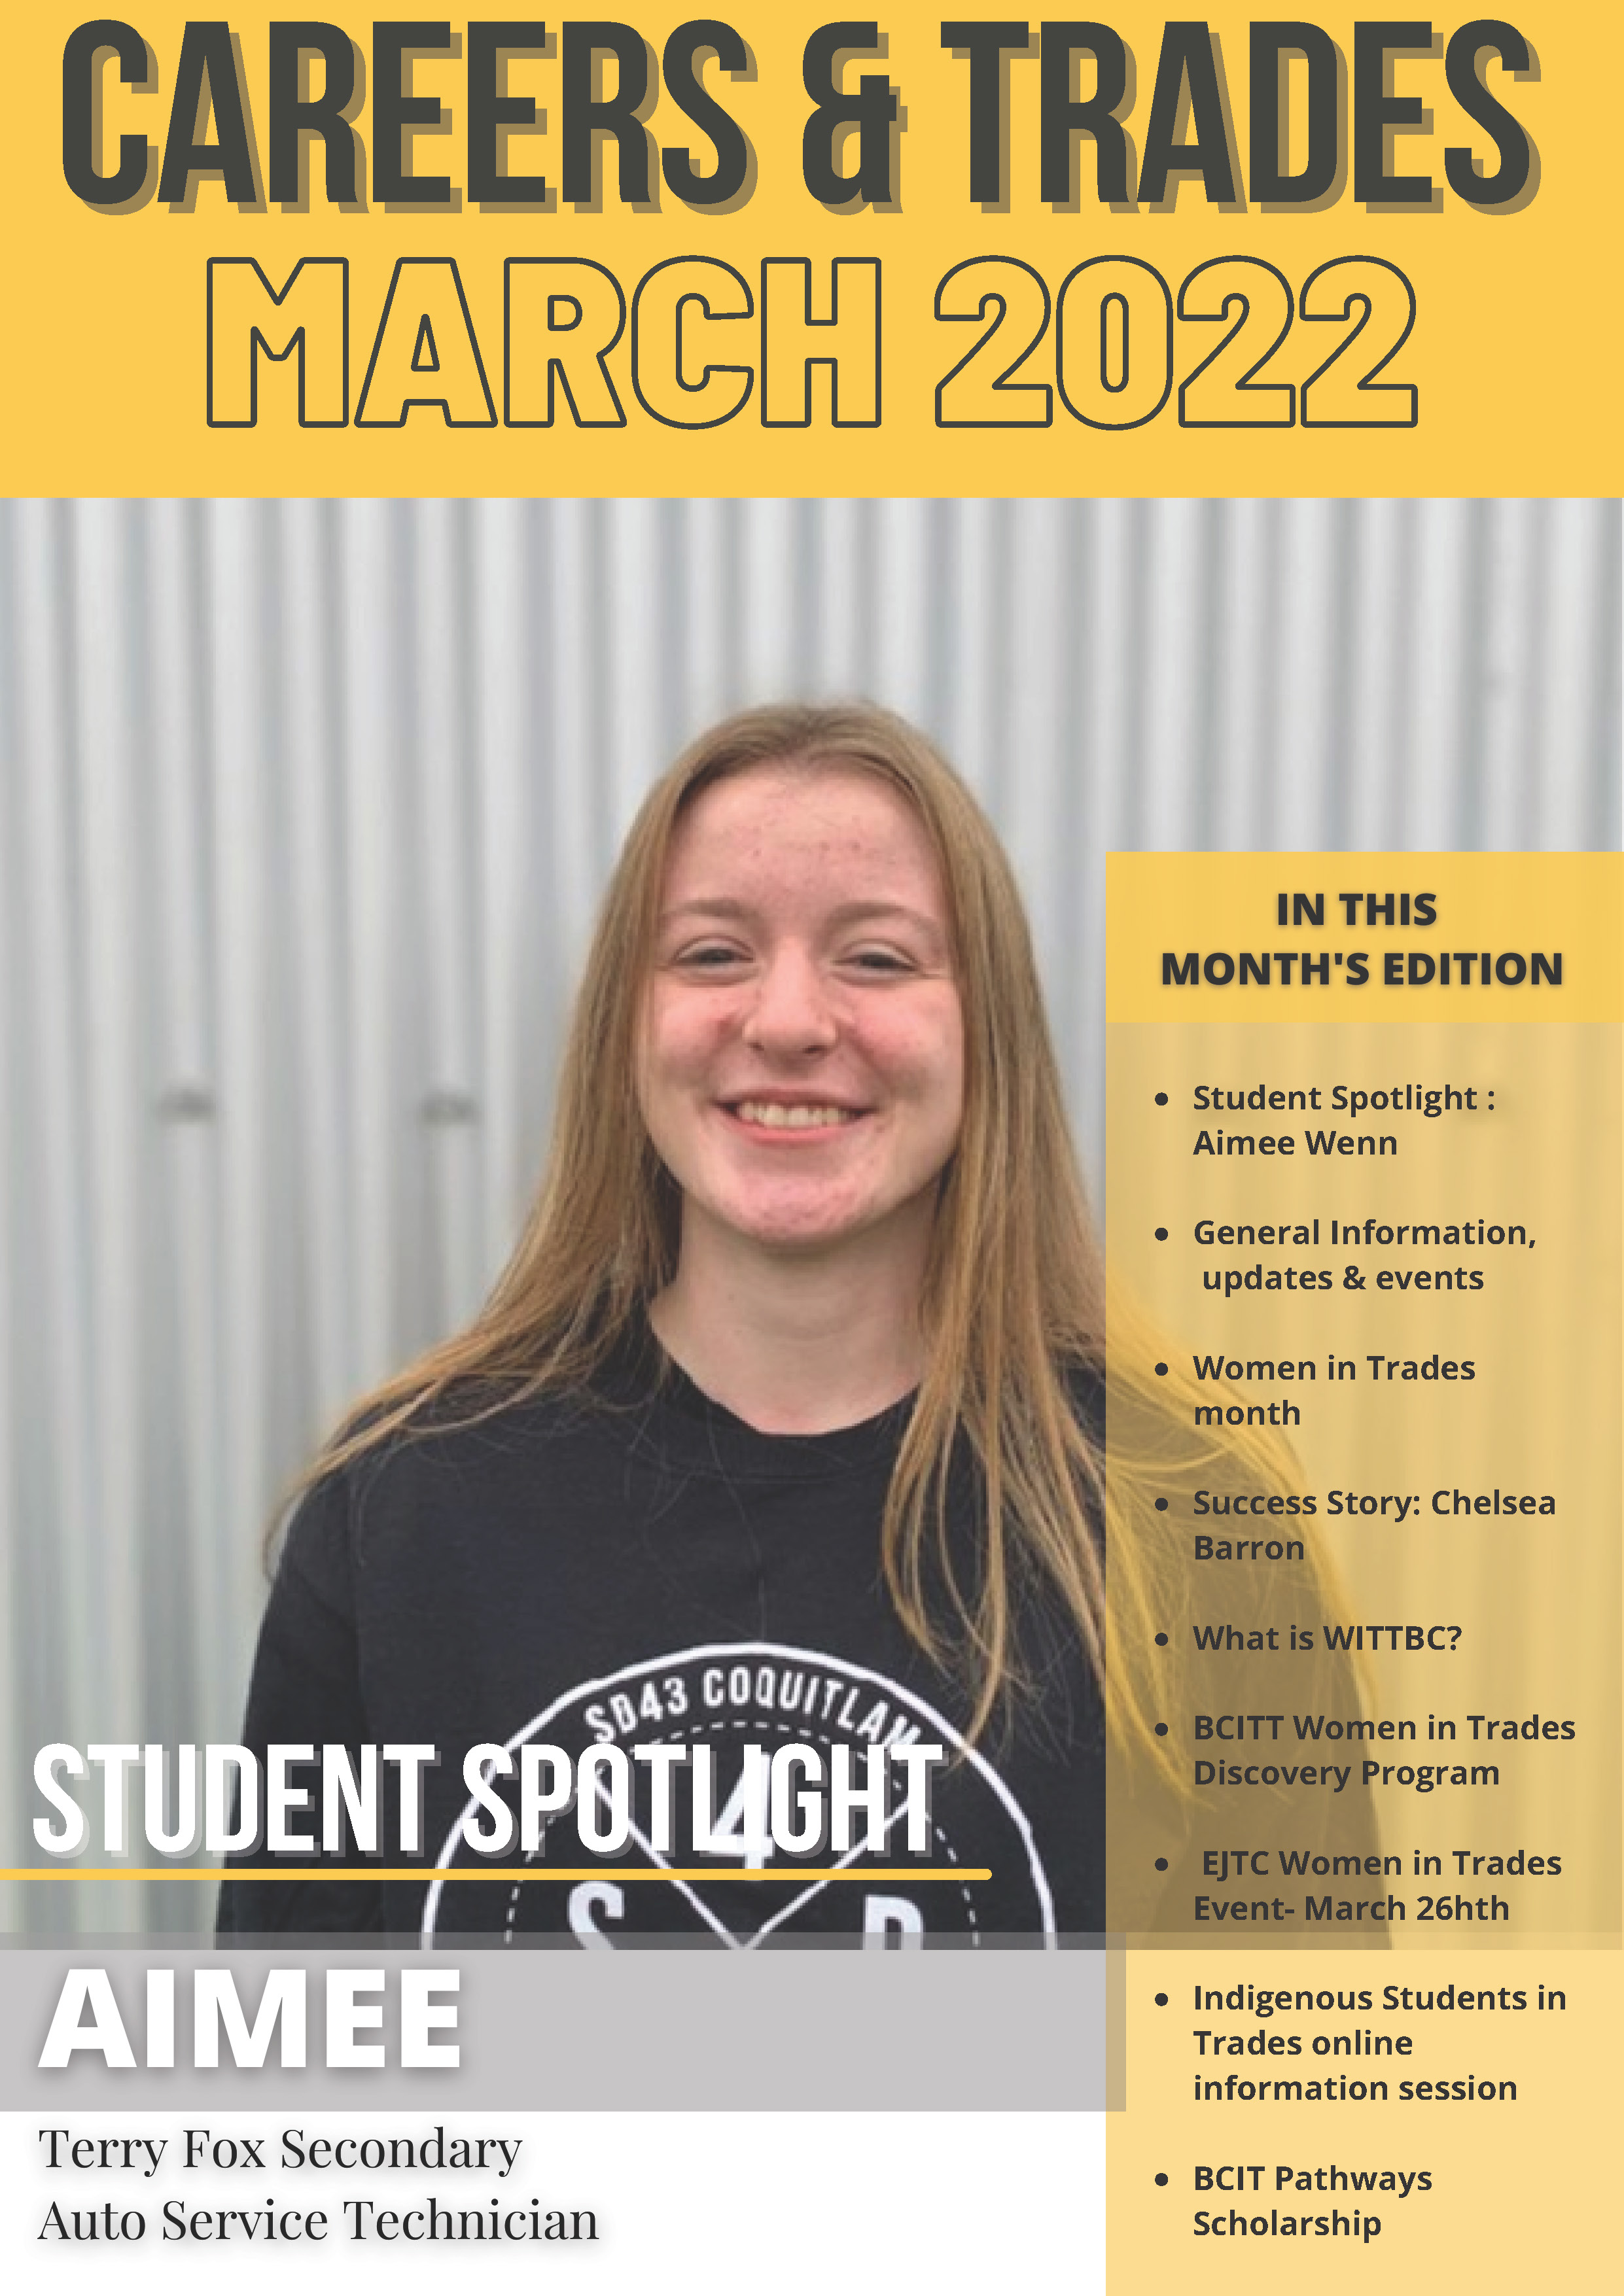 SD43 CAREER PROGRAMS NEWSLETTER (8).pdf MARCH 2022_Page_01.jpg